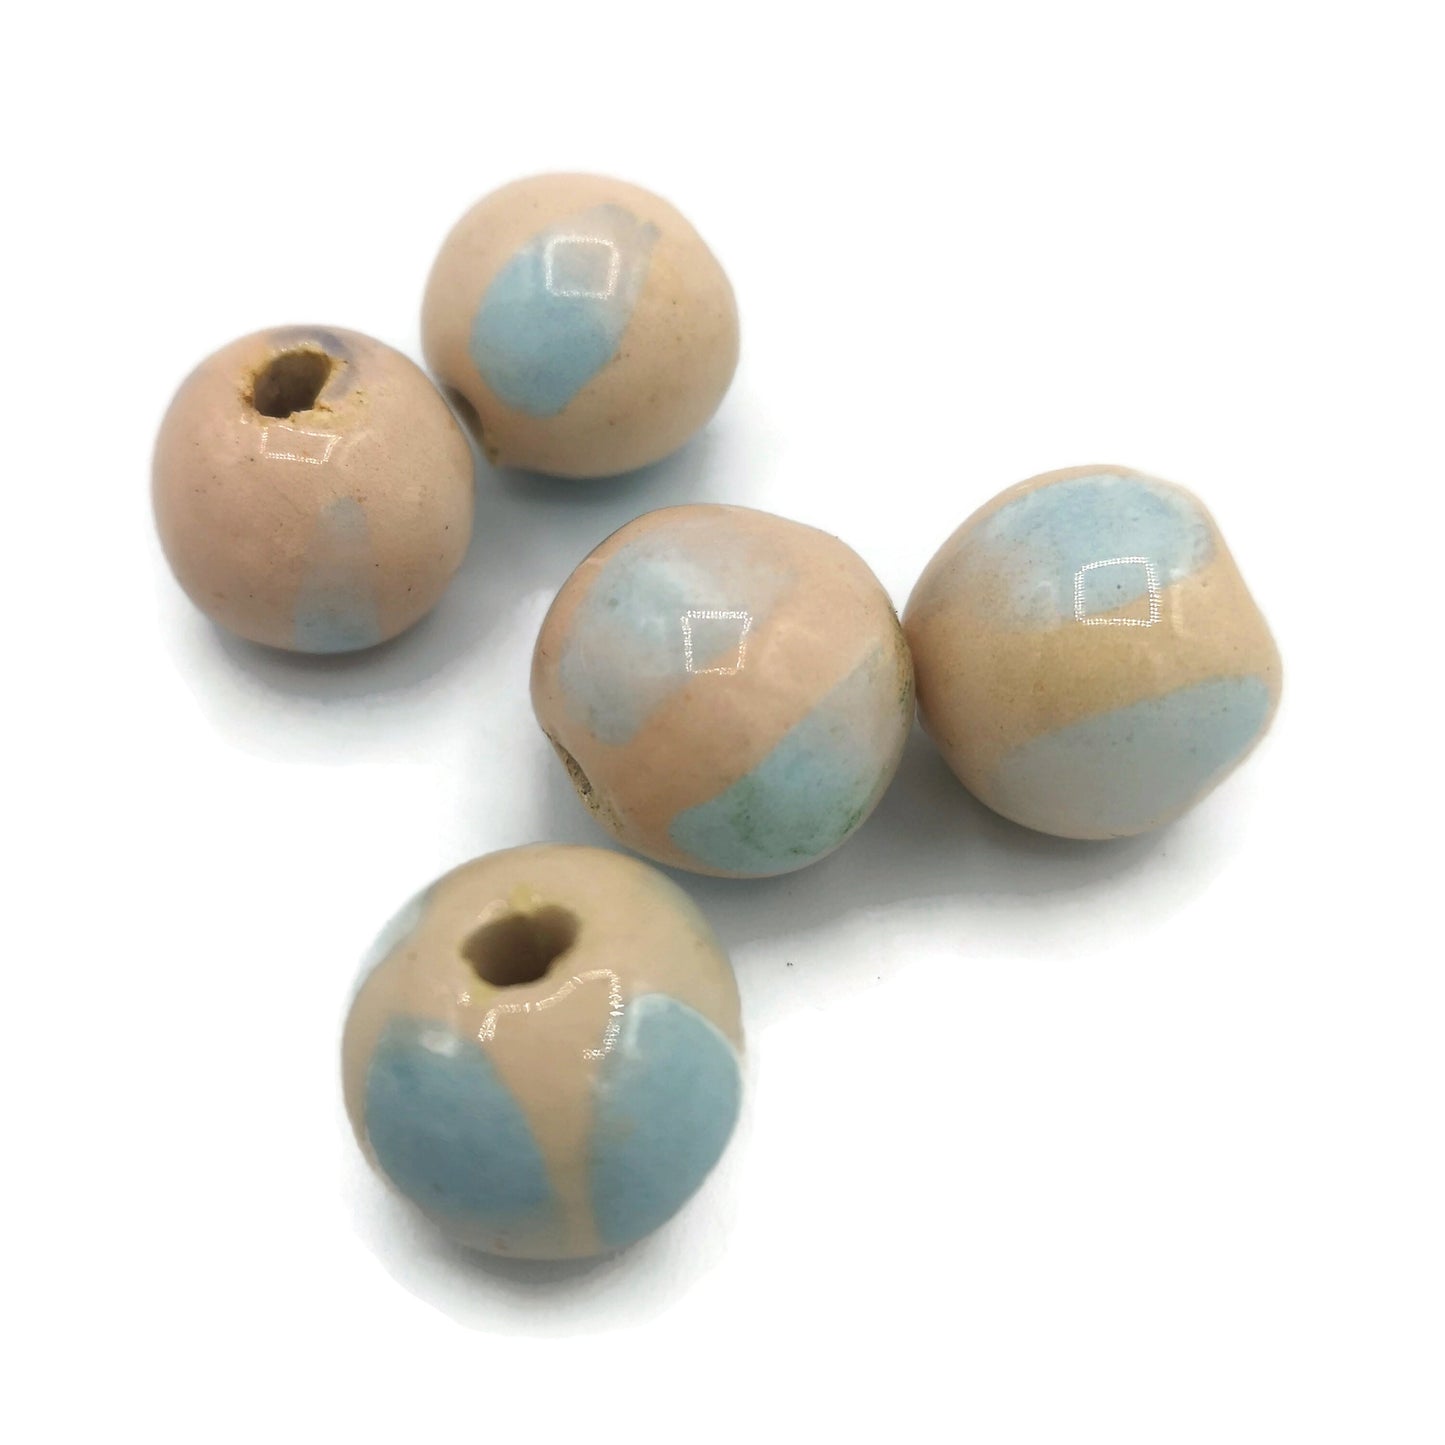 ROUND BEADS, BUBBLEGUM Beads, Set of 5 2mm Hole Ceramic Beads For Jewelry Making, Unique Pastel Clay Beads For Macrame - Ceramica Ana Rafael